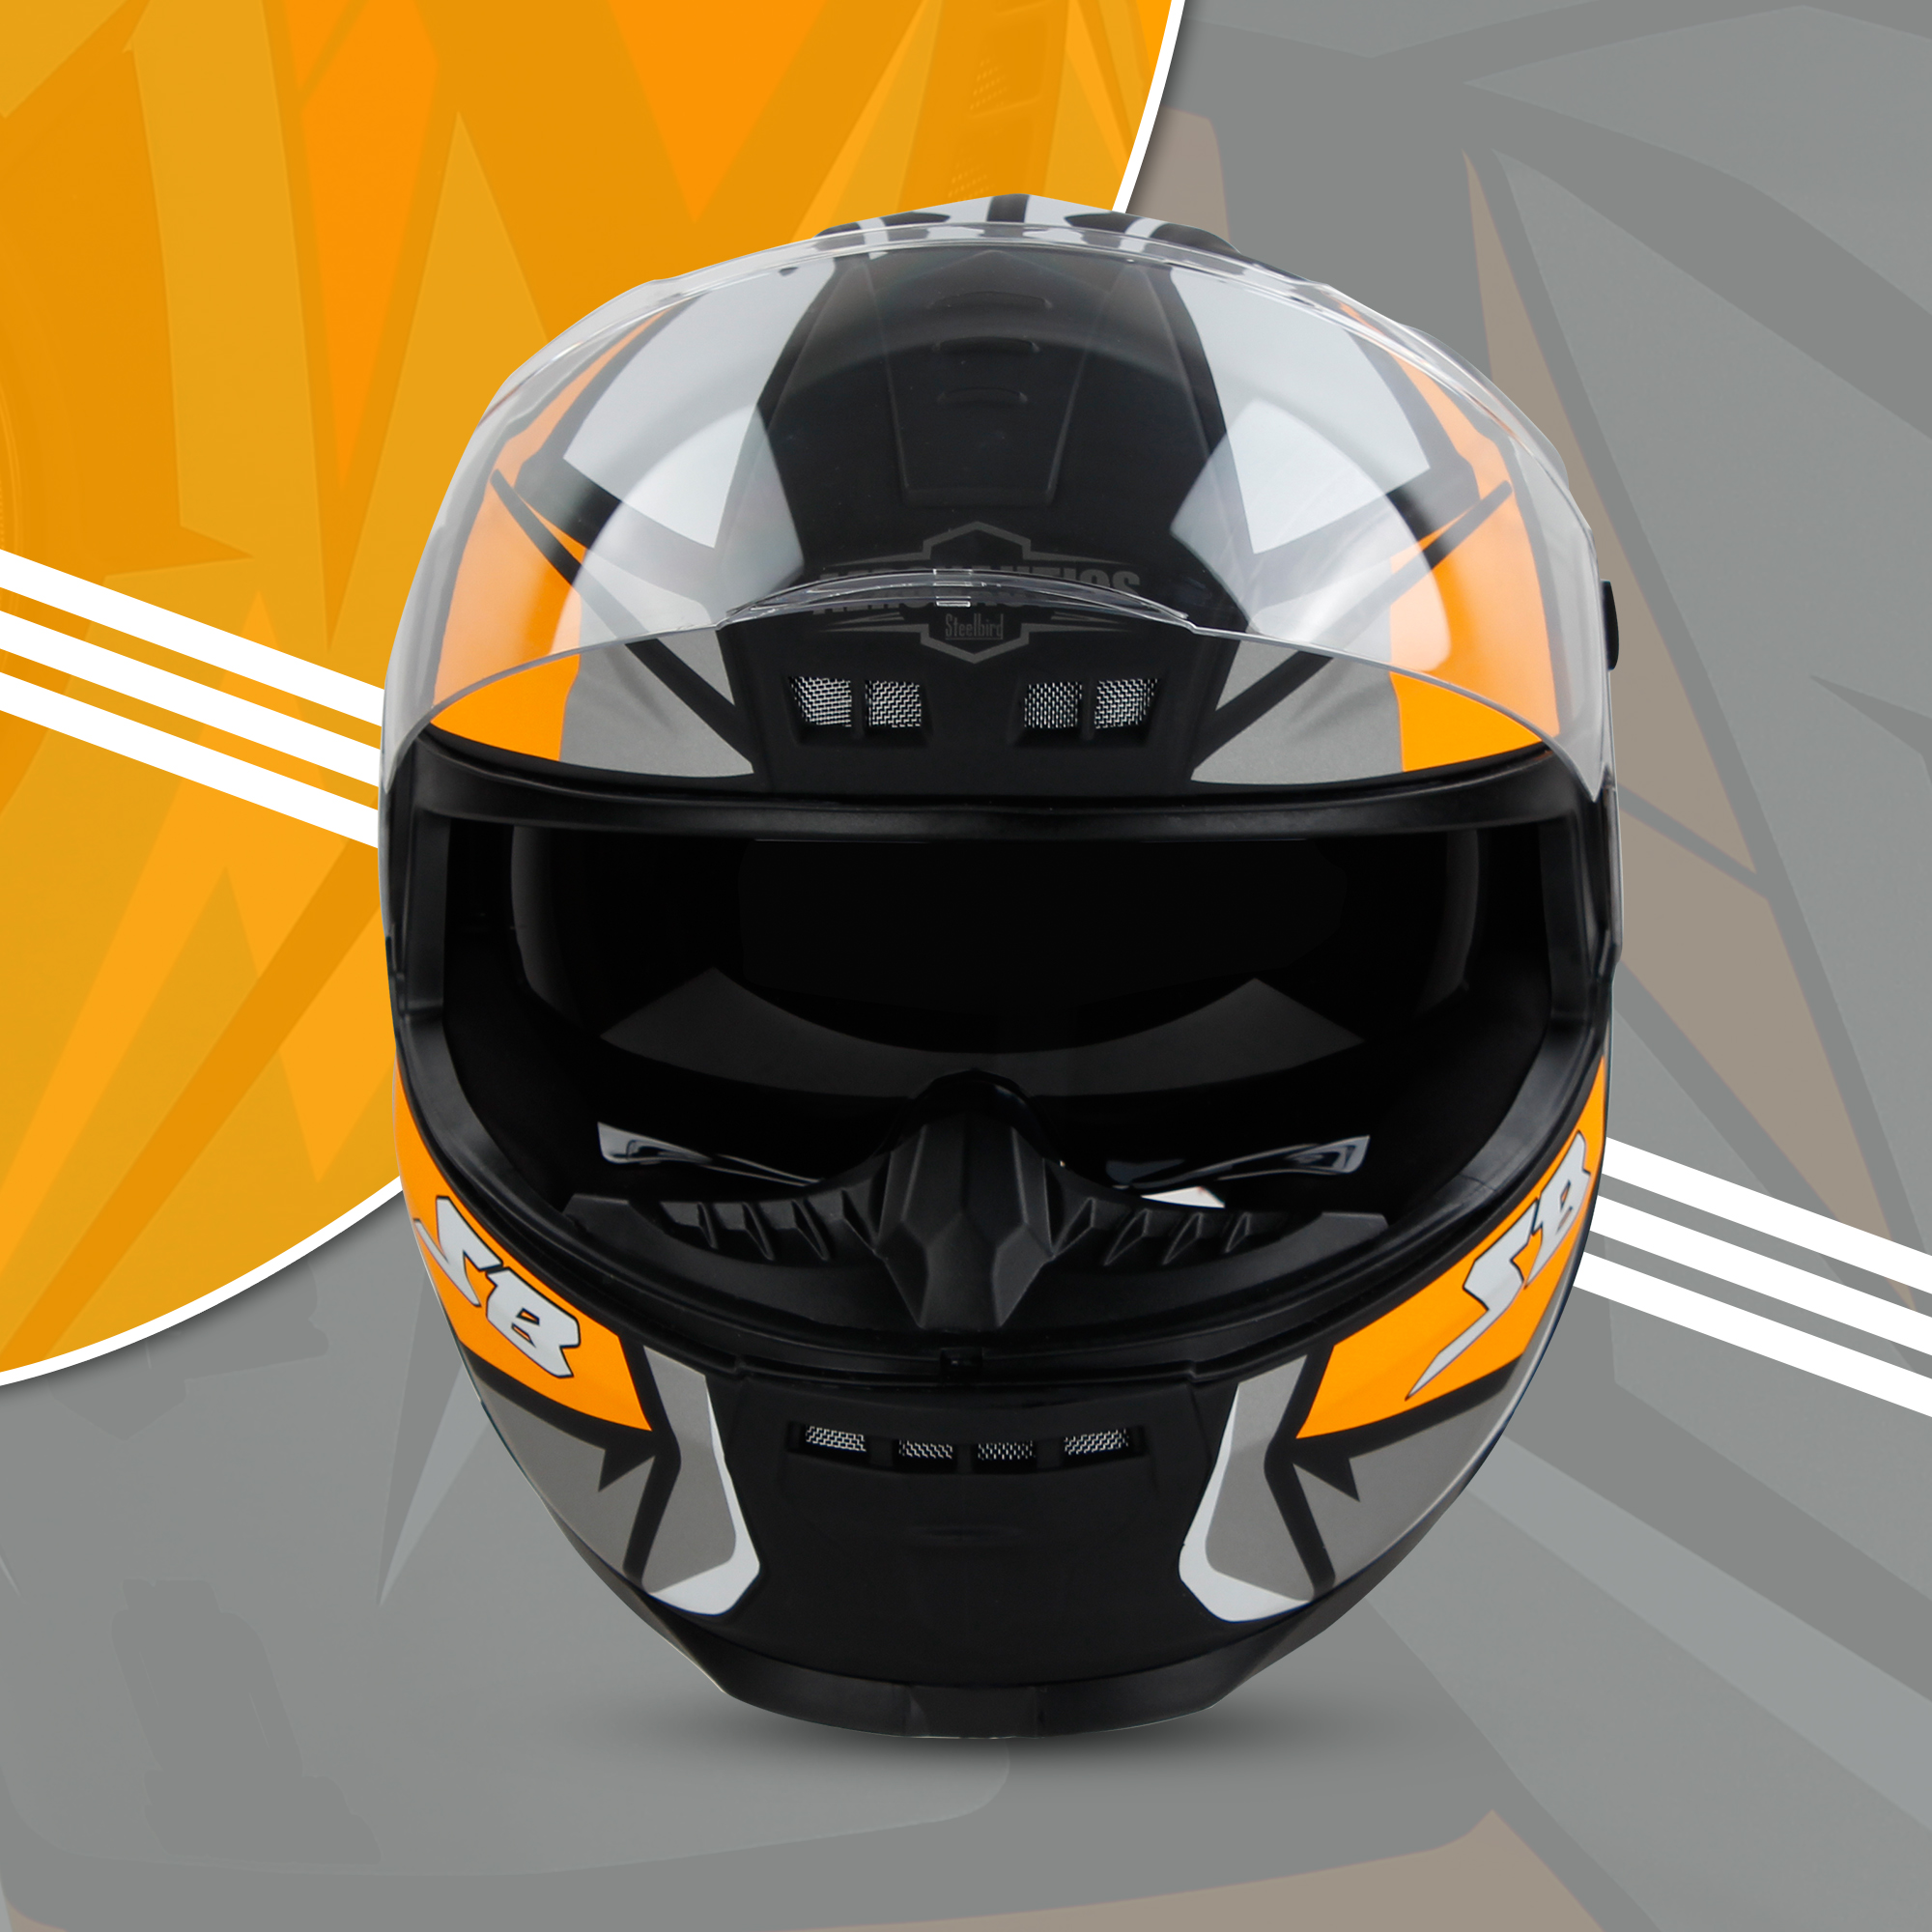 Steelbird SBH-40 Decode ISI Certified Full Face Graphic Helmet For Men And Women With Inner Sun Shield (Glossy Black Orange)